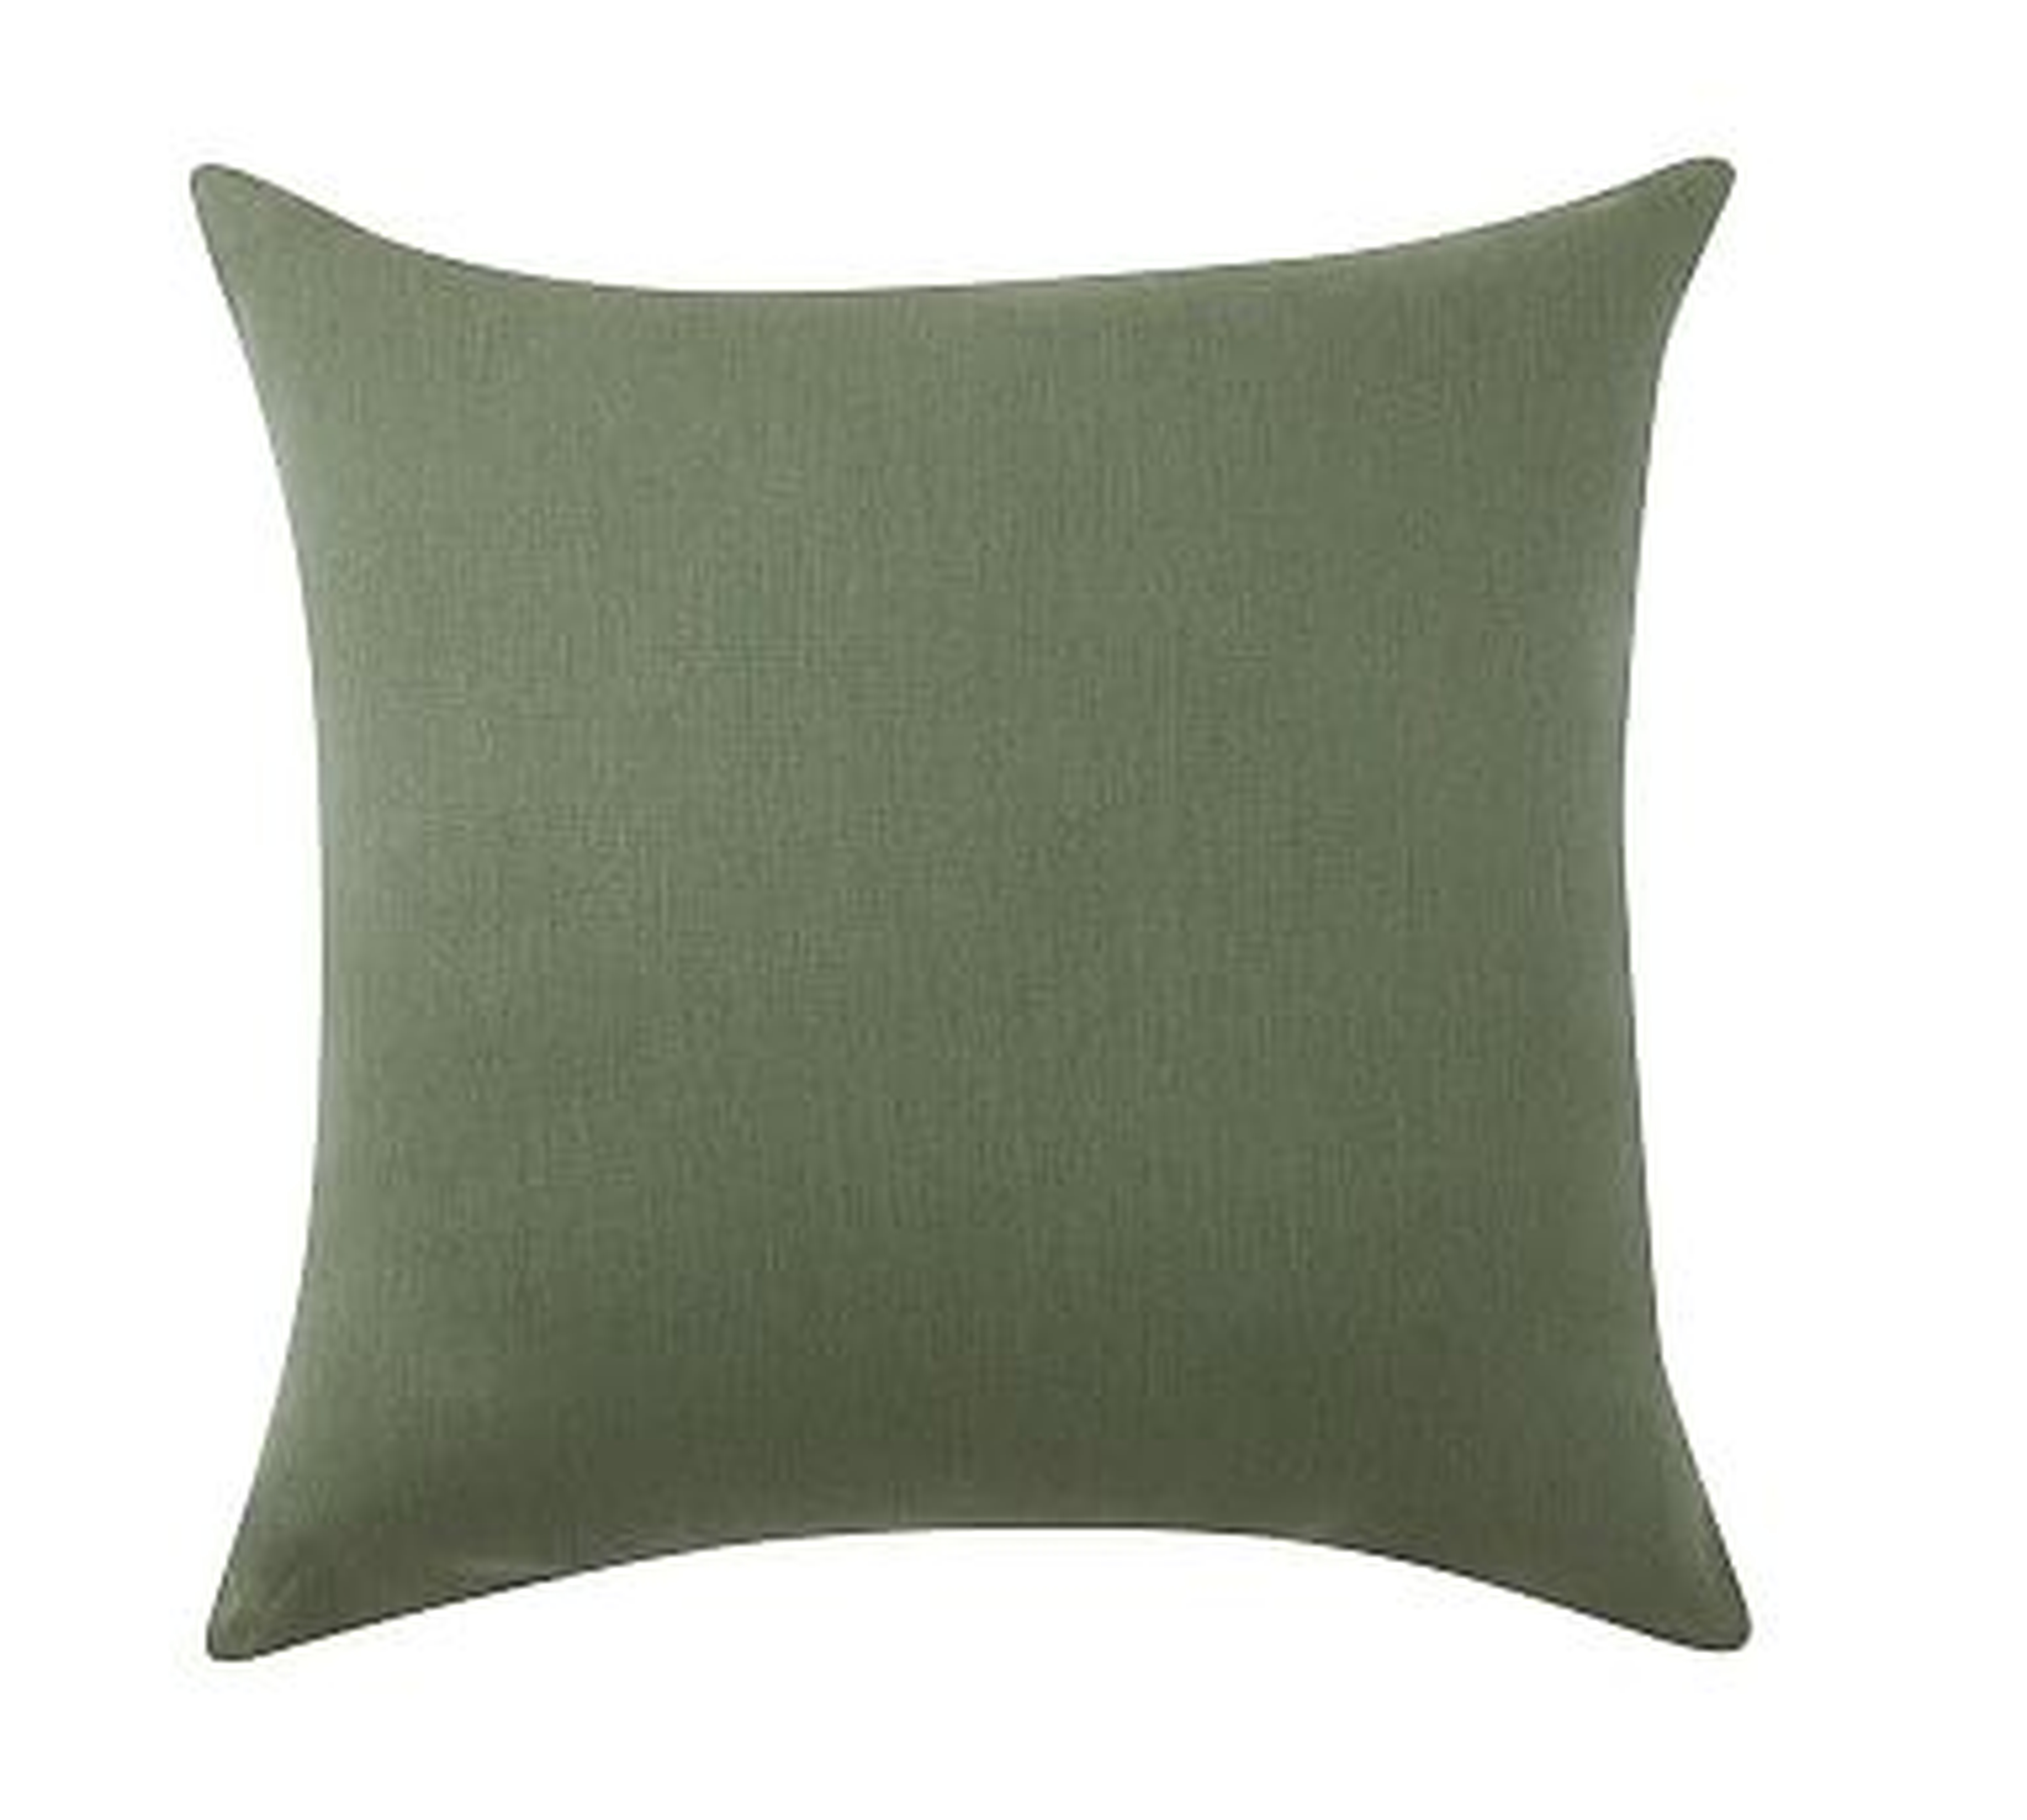 Sunbrella(R) Contrast Piped Solid Indoor/Outdoor Pillow, 18", Fern - Pottery Barn